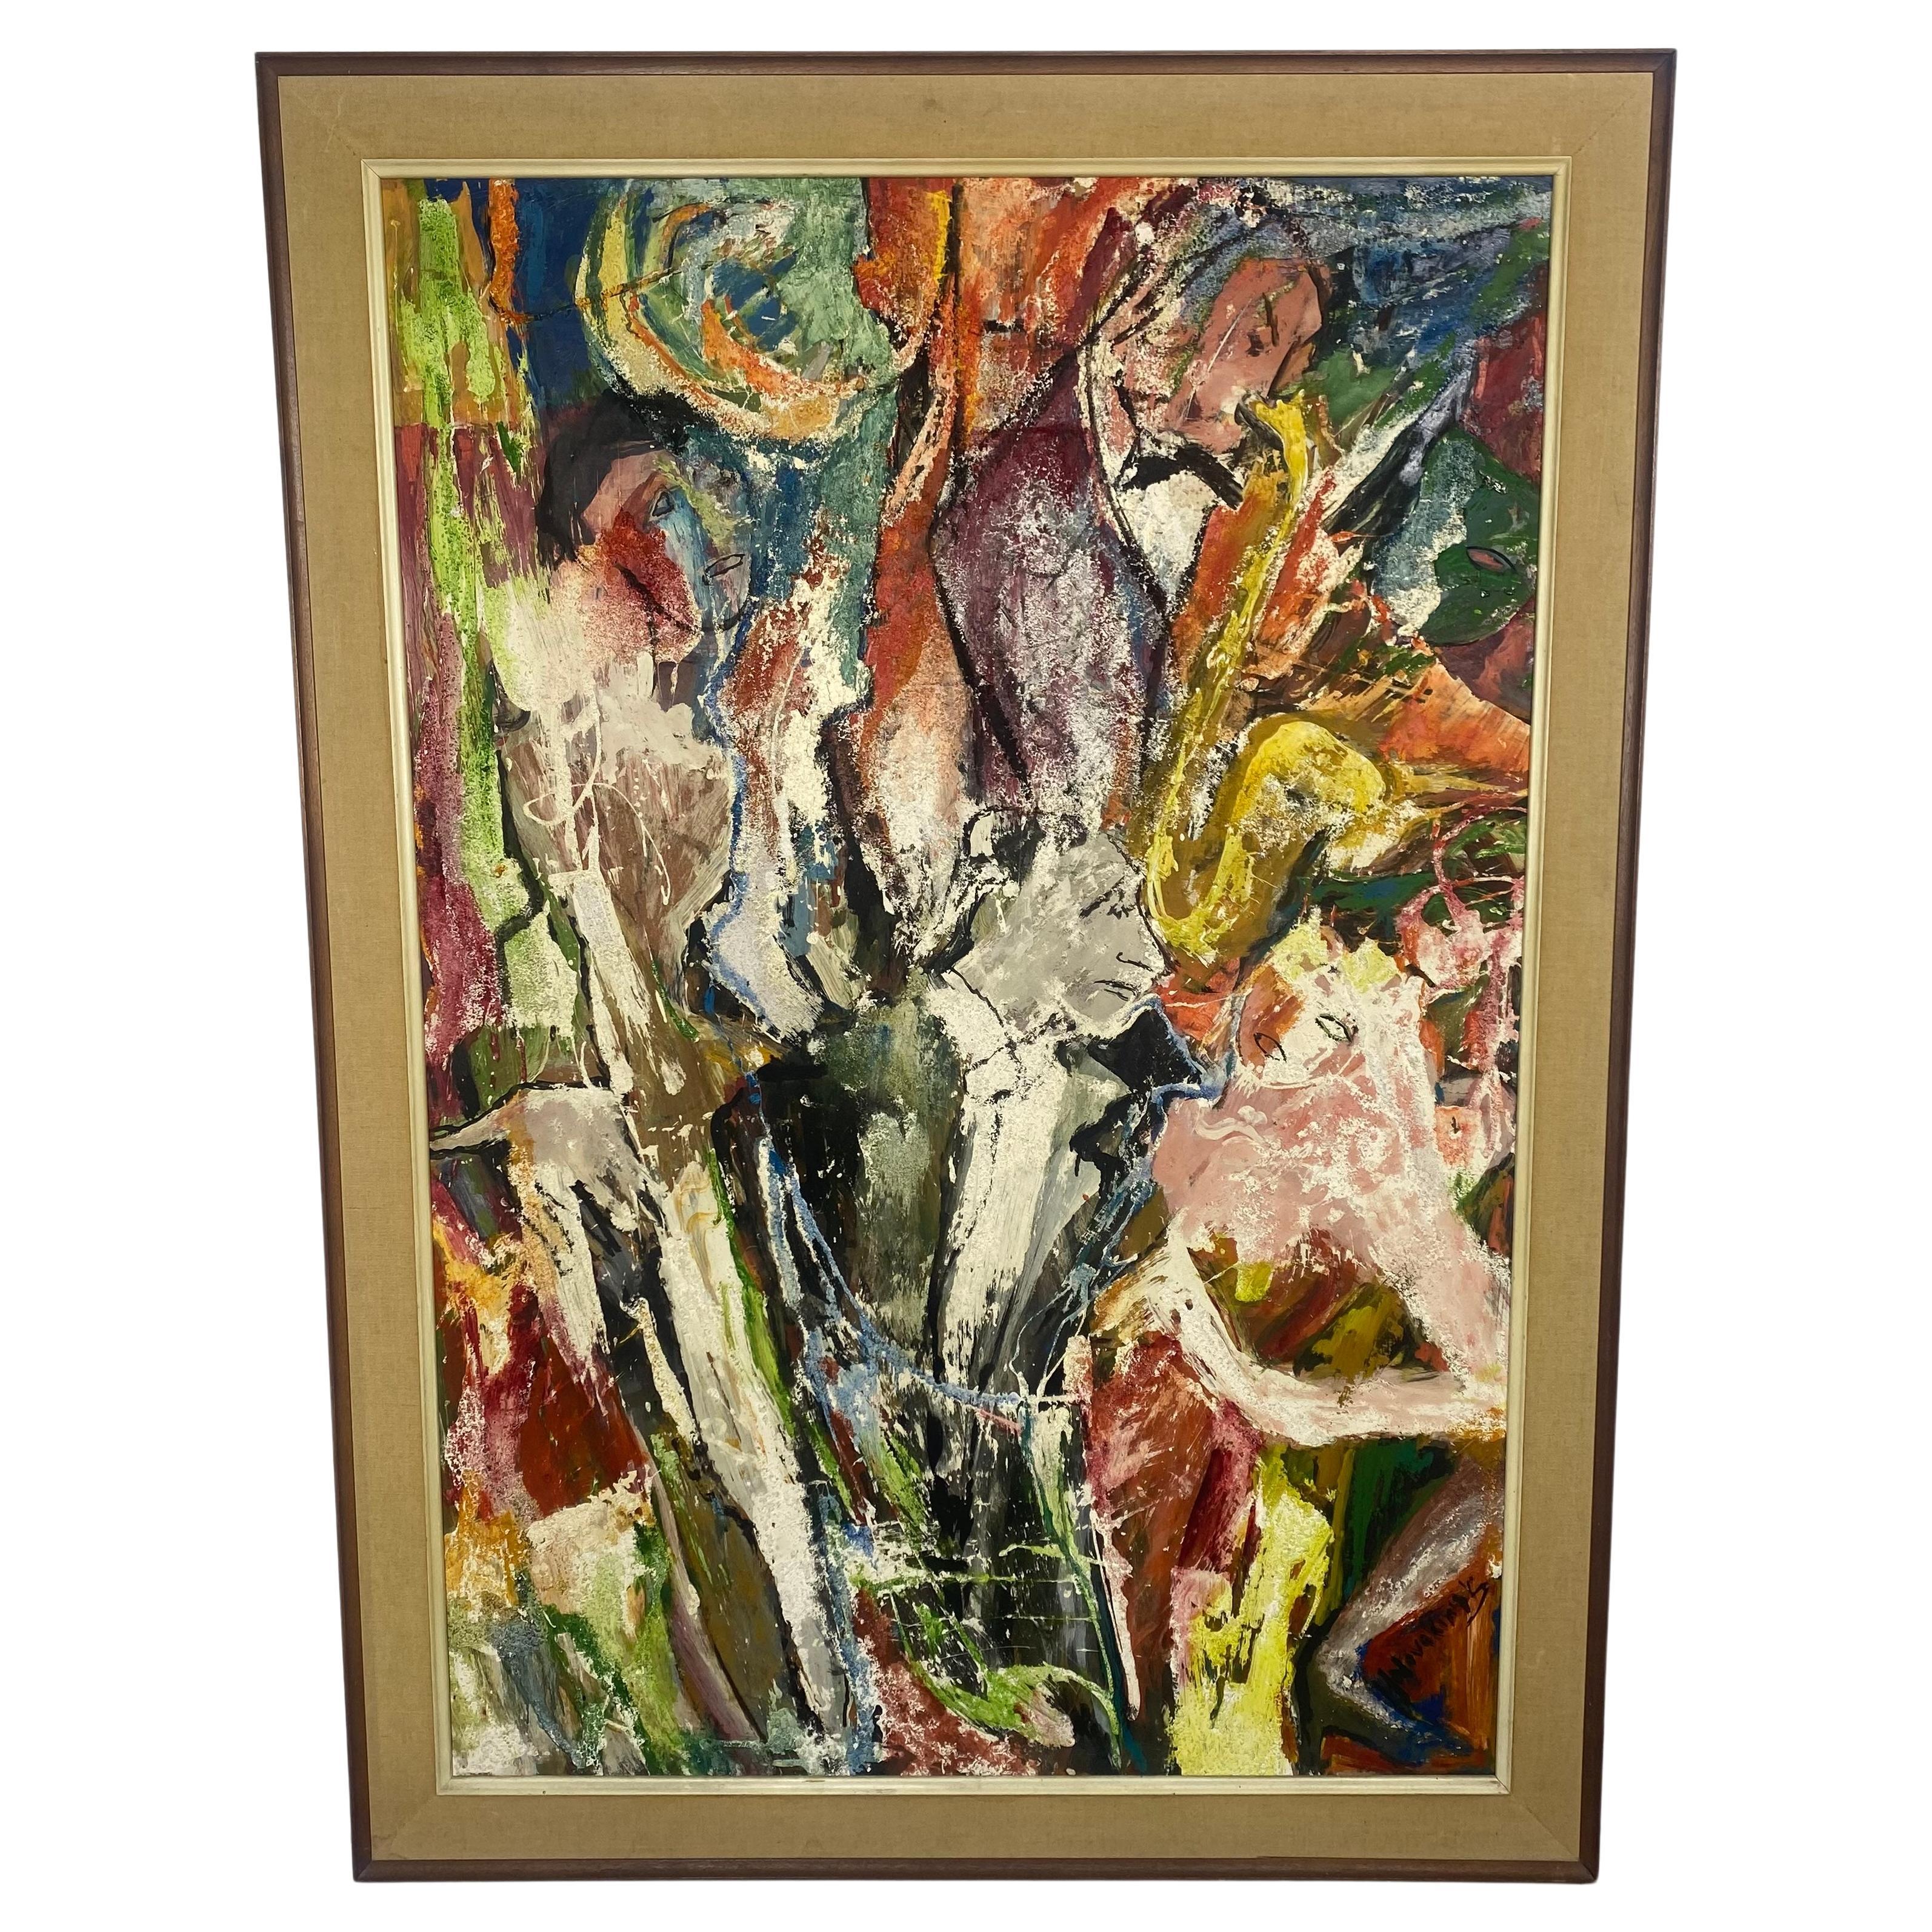 Large Modern Abstract Impasto Oil Painting on Board, "Night Club" Jazz For Sale